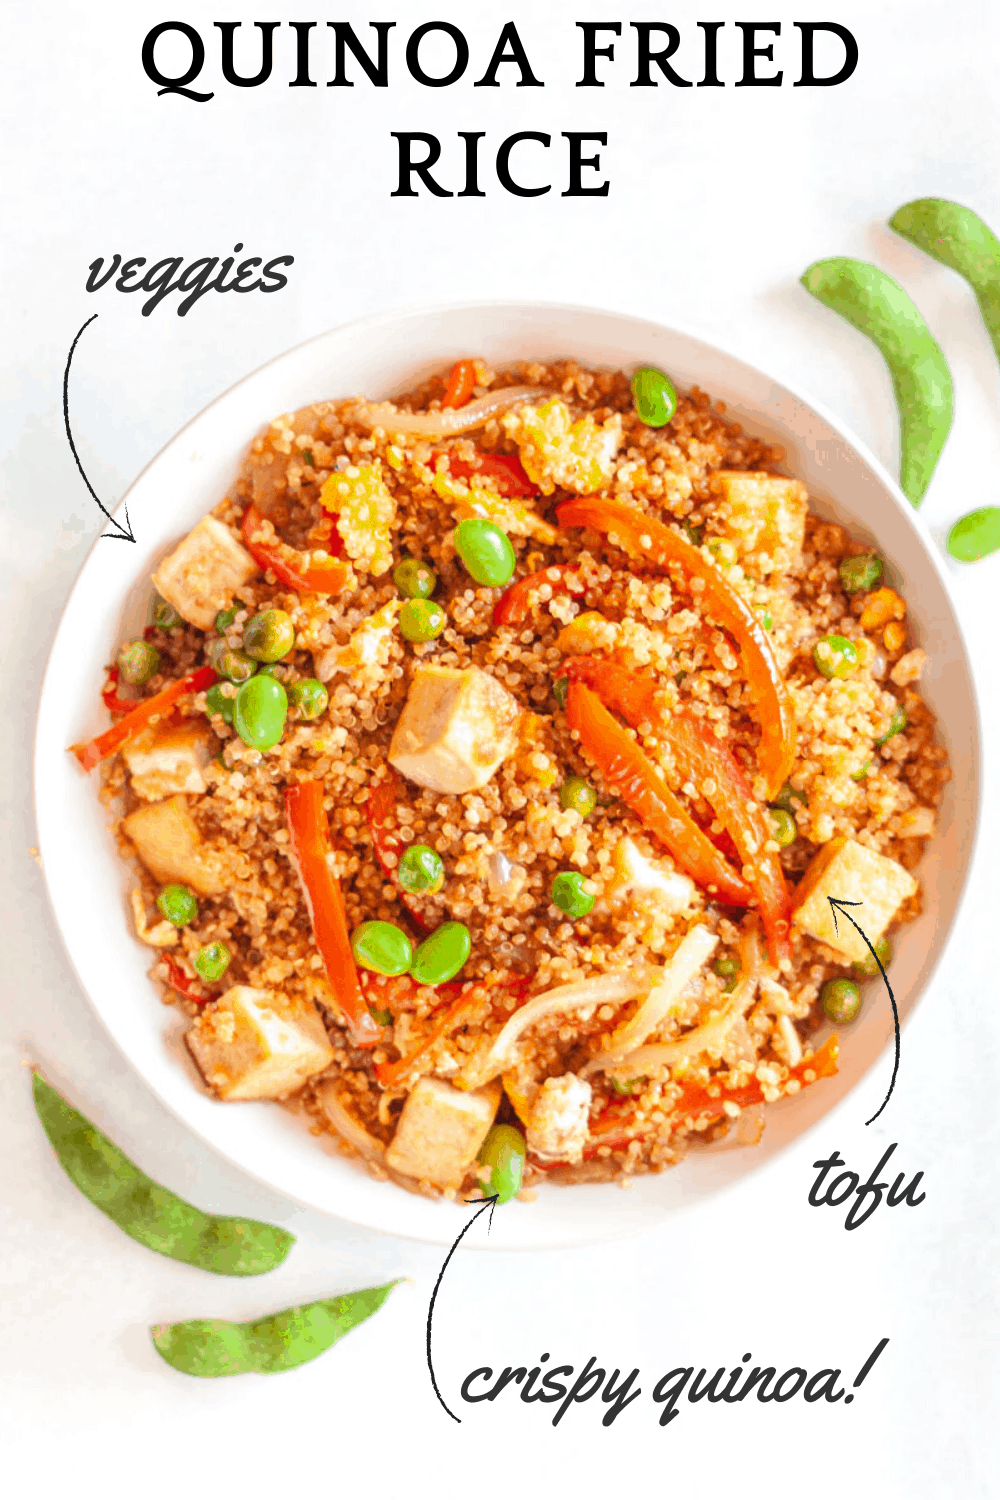 Bowl of quinoa fried rice with tofu